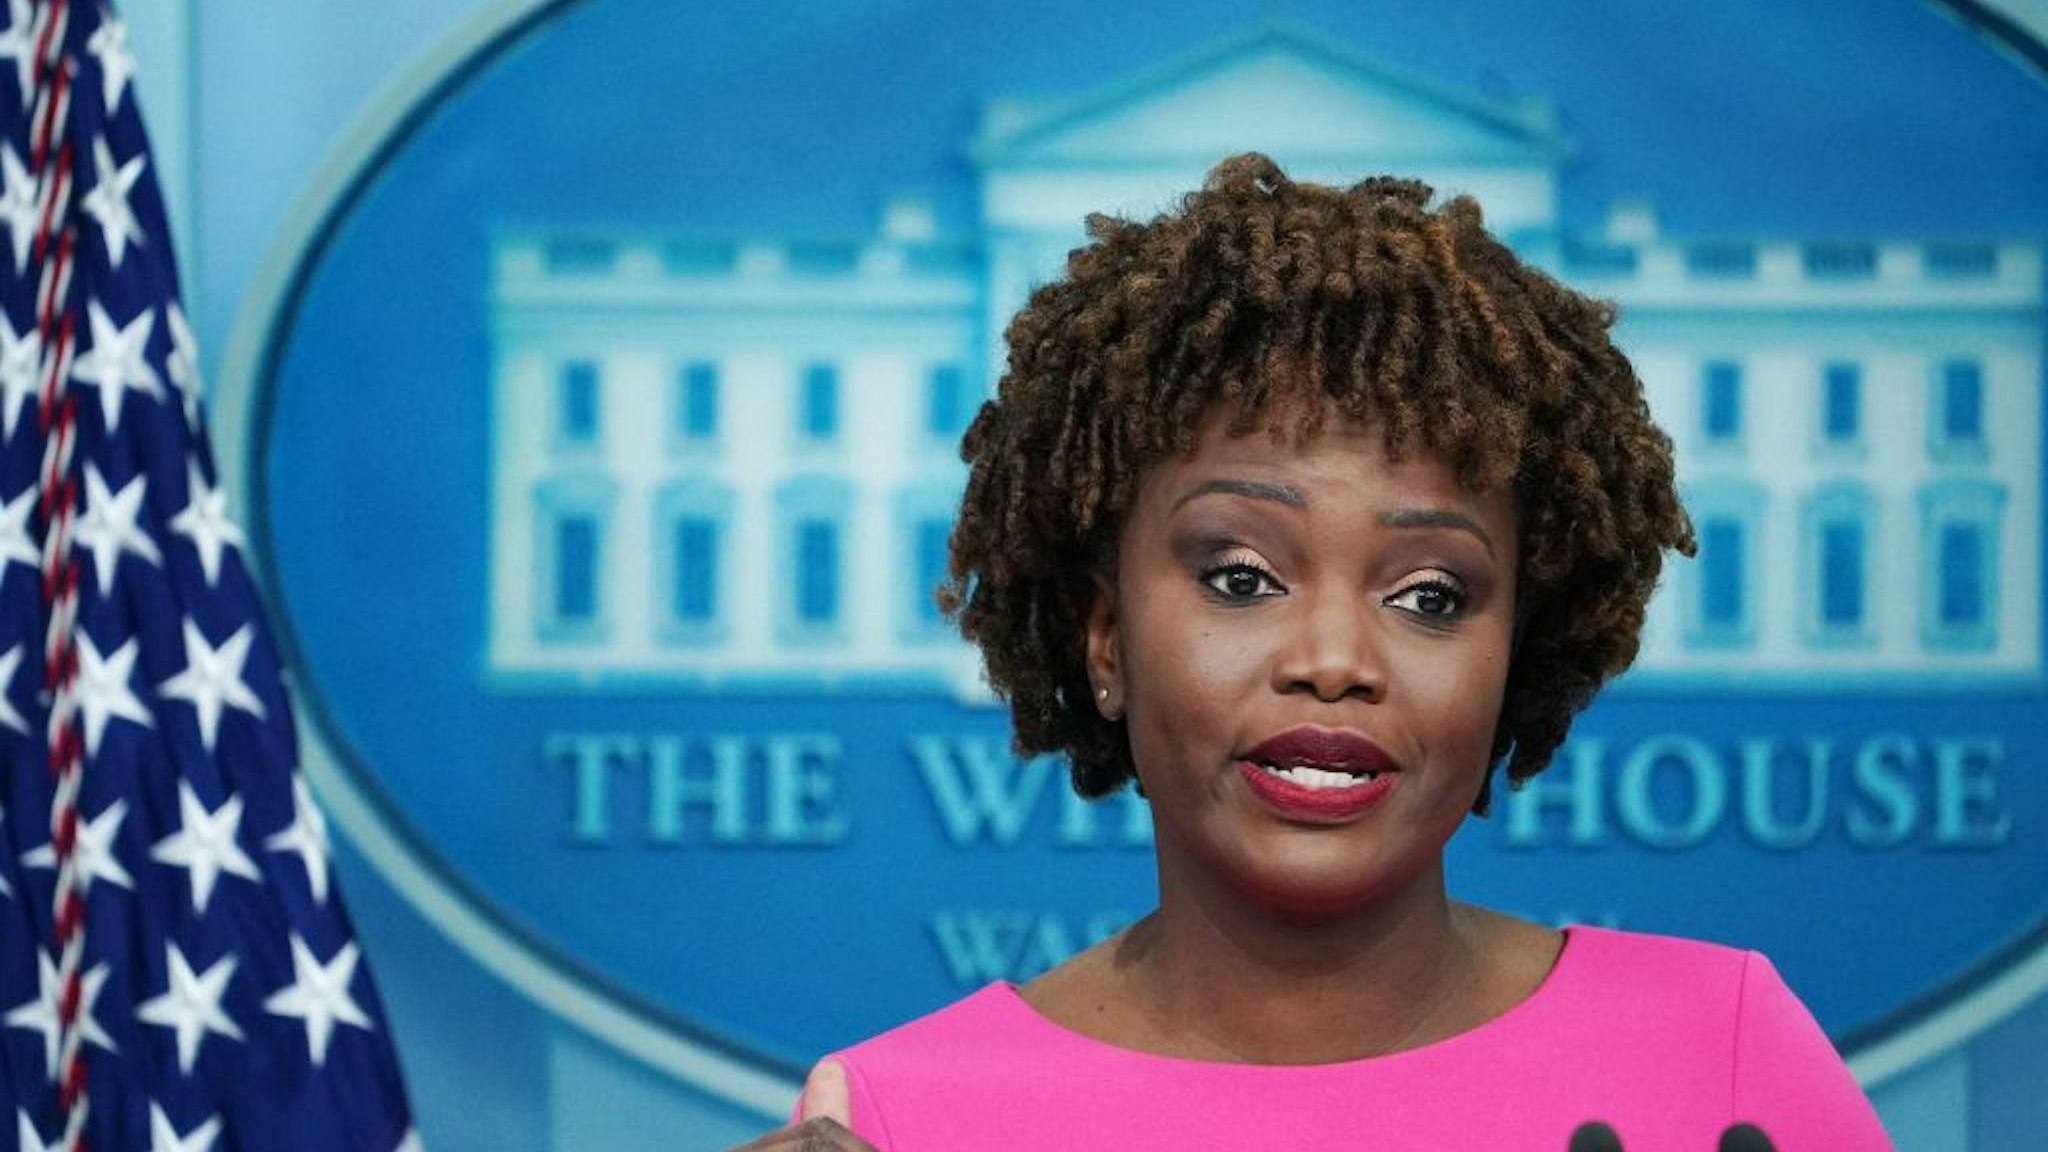 White House Press Karine Jean-Pierre speaks during the daily briefing in the Brady Briefing Room of the White House in Washington, DC on May 26, 2022. (Photo by MANDEL NGAN / AFP) (Photo by MANDEL NGAN/AFP via Getty Images)